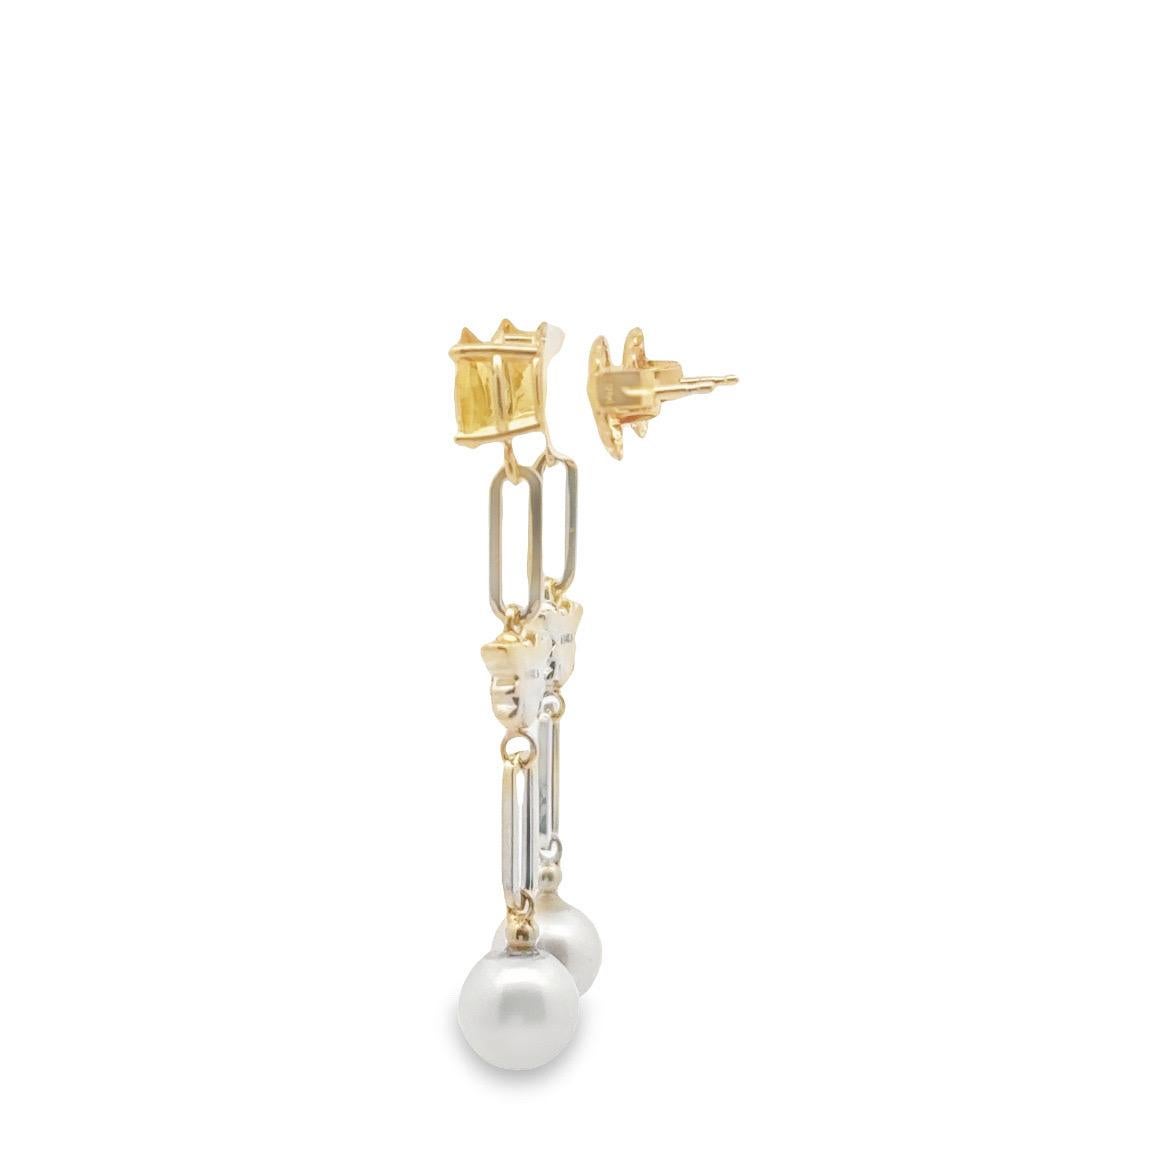 Pair 14K yellow gold paperclip dangling earrings with two pear shaped citrines, two bumble bee charms  and two 7mm cultured pearls.

- Post Pushbacks
- Citrines weigh 1.13 carats total 
- Pearls measure 7mm each
- Bee charms are furnished with